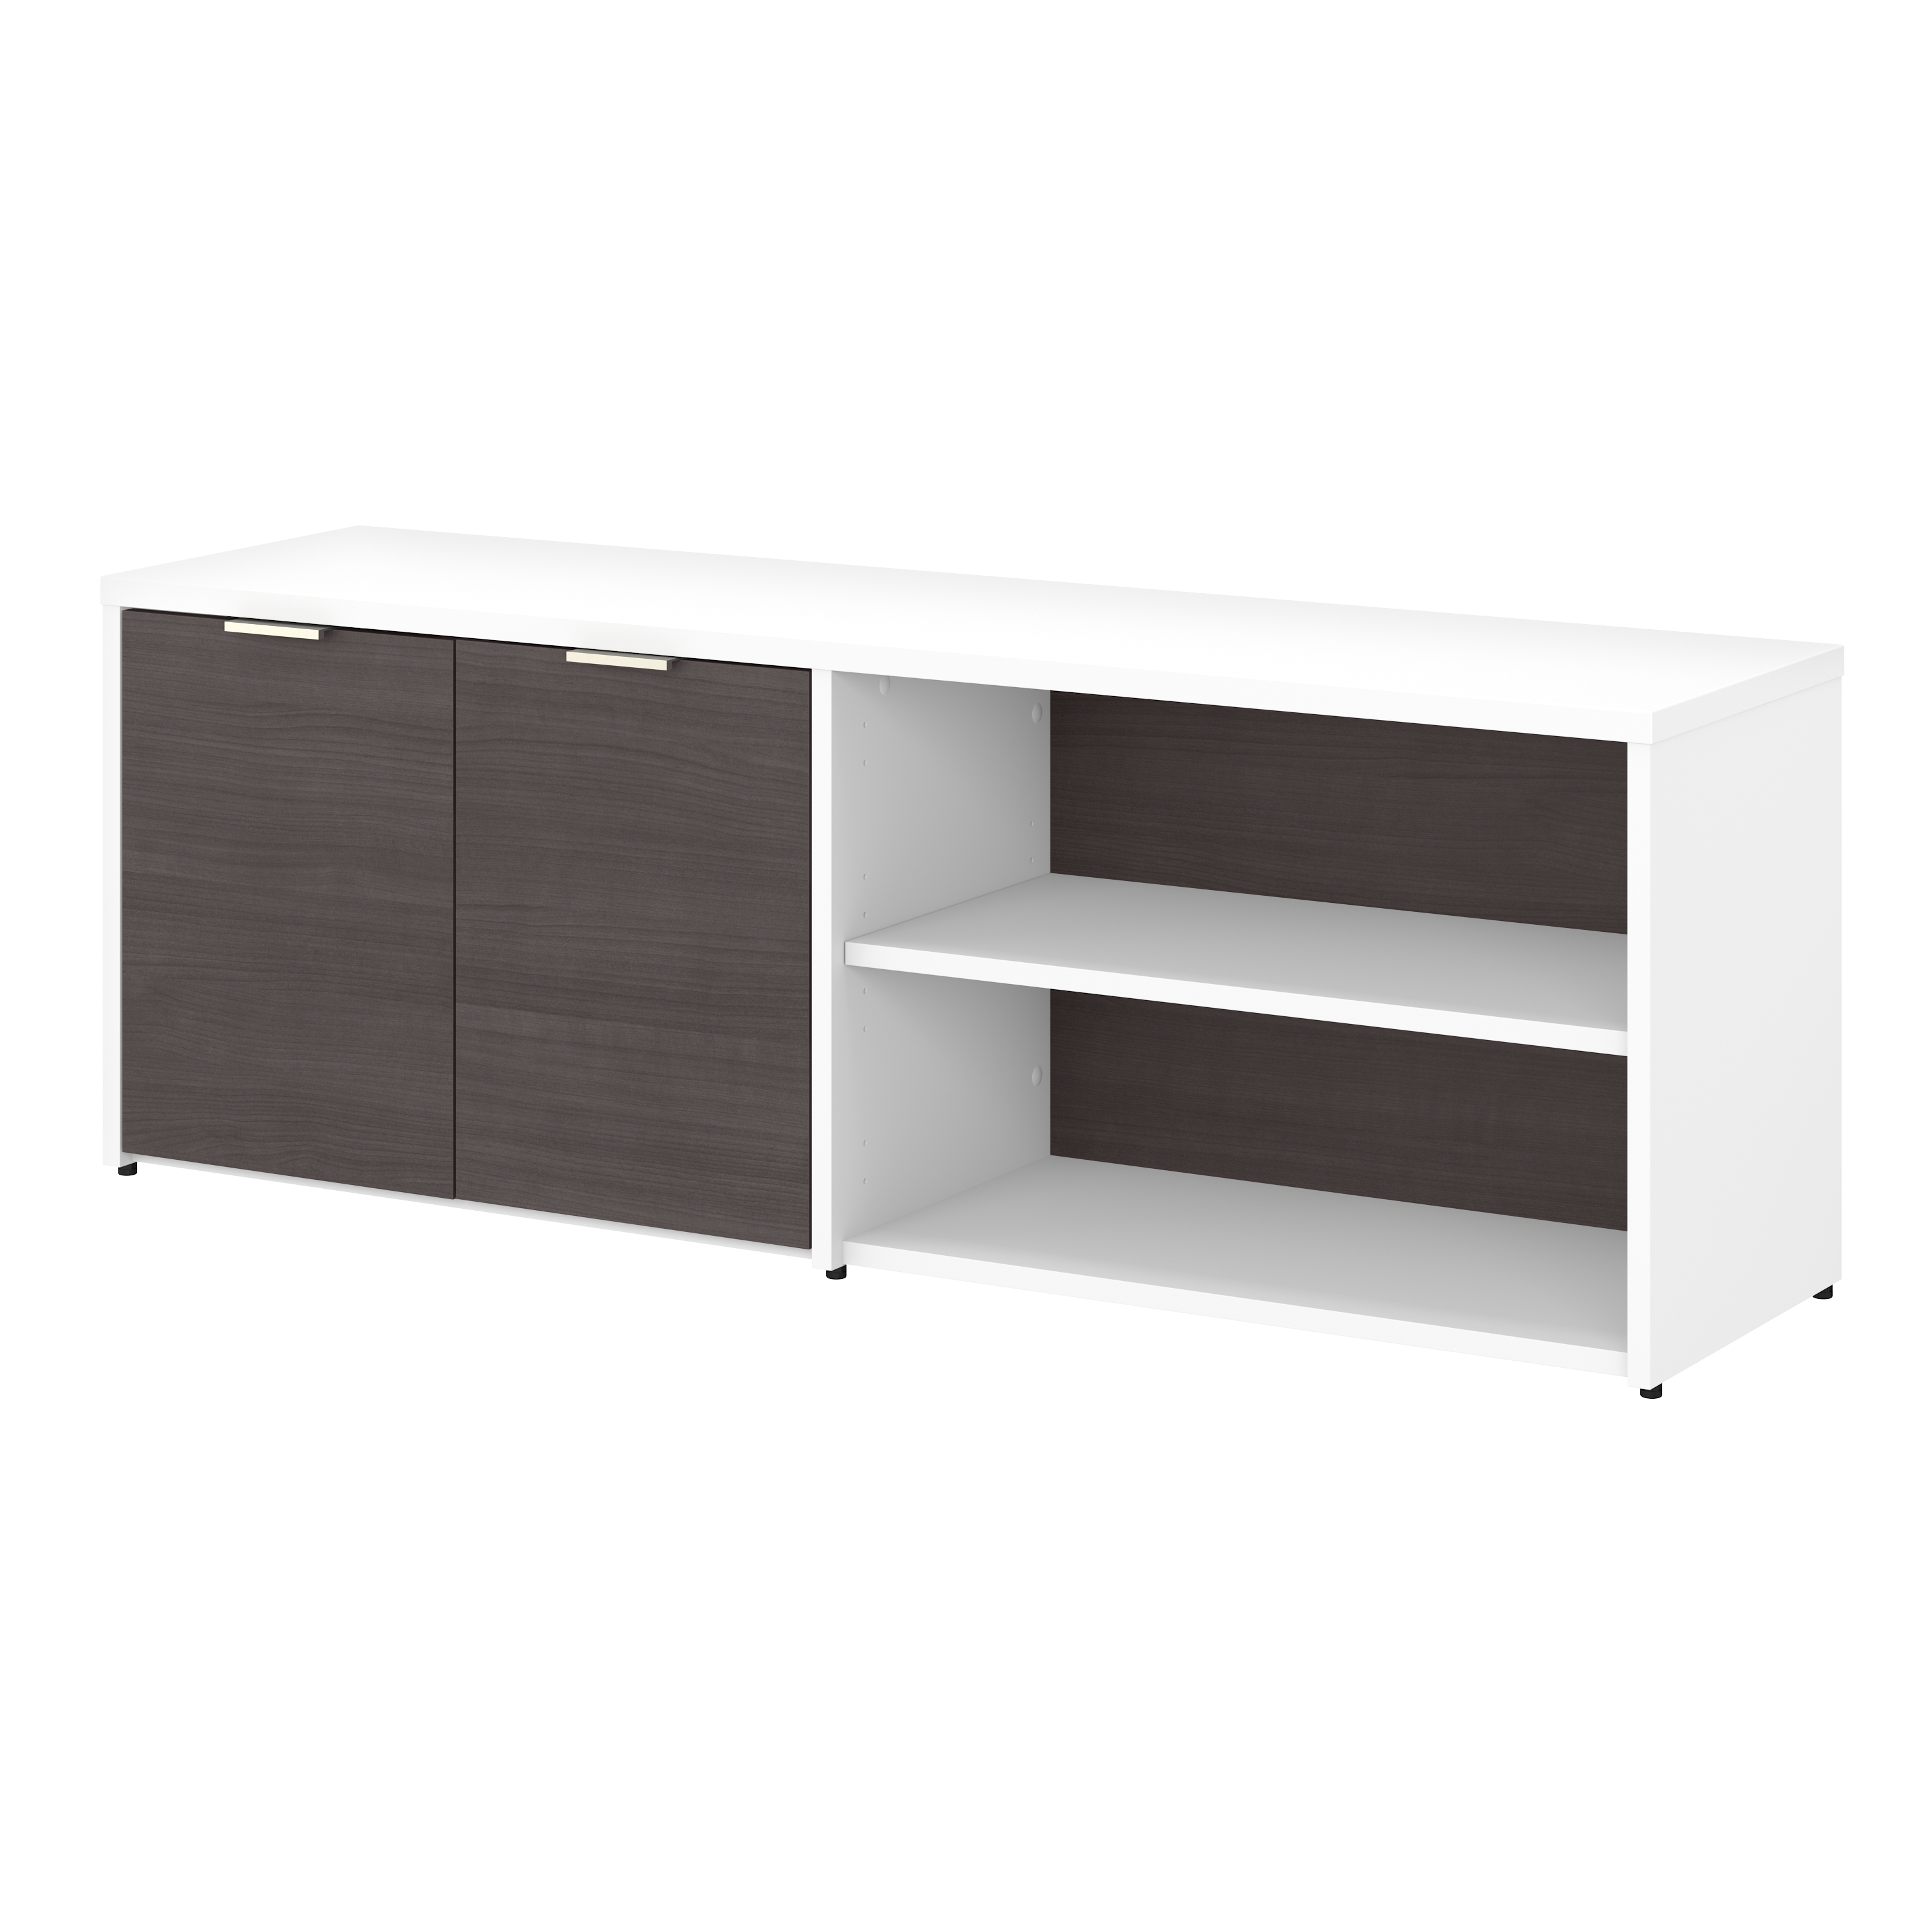 Shop Bush Business Furniture Jamestown Low Storage Cabinet with Doors and Shelves 02 JTS160SGWH #color_storm gray/white